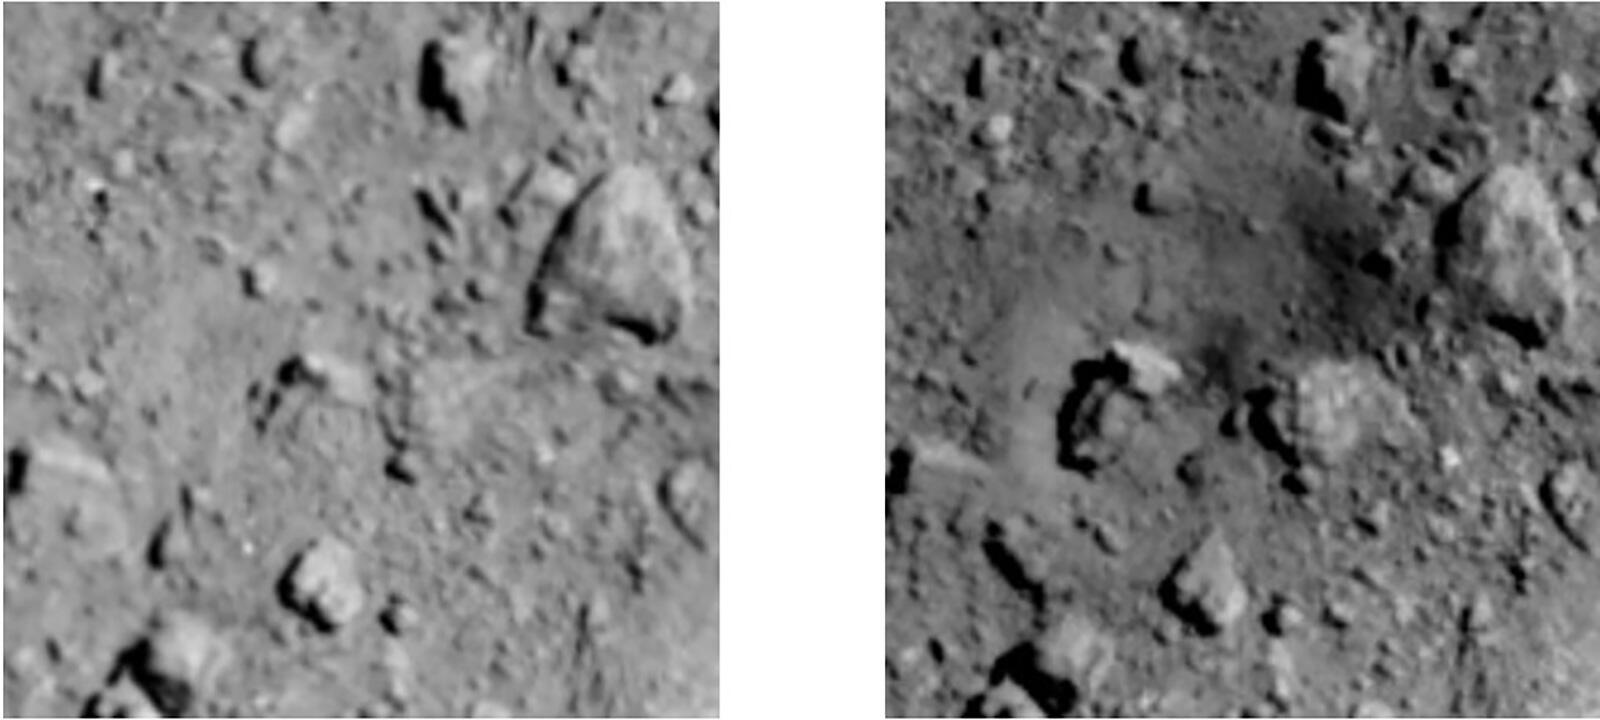 The surface of Ryugu before (left) and after (right) the creation of an artificial crater.